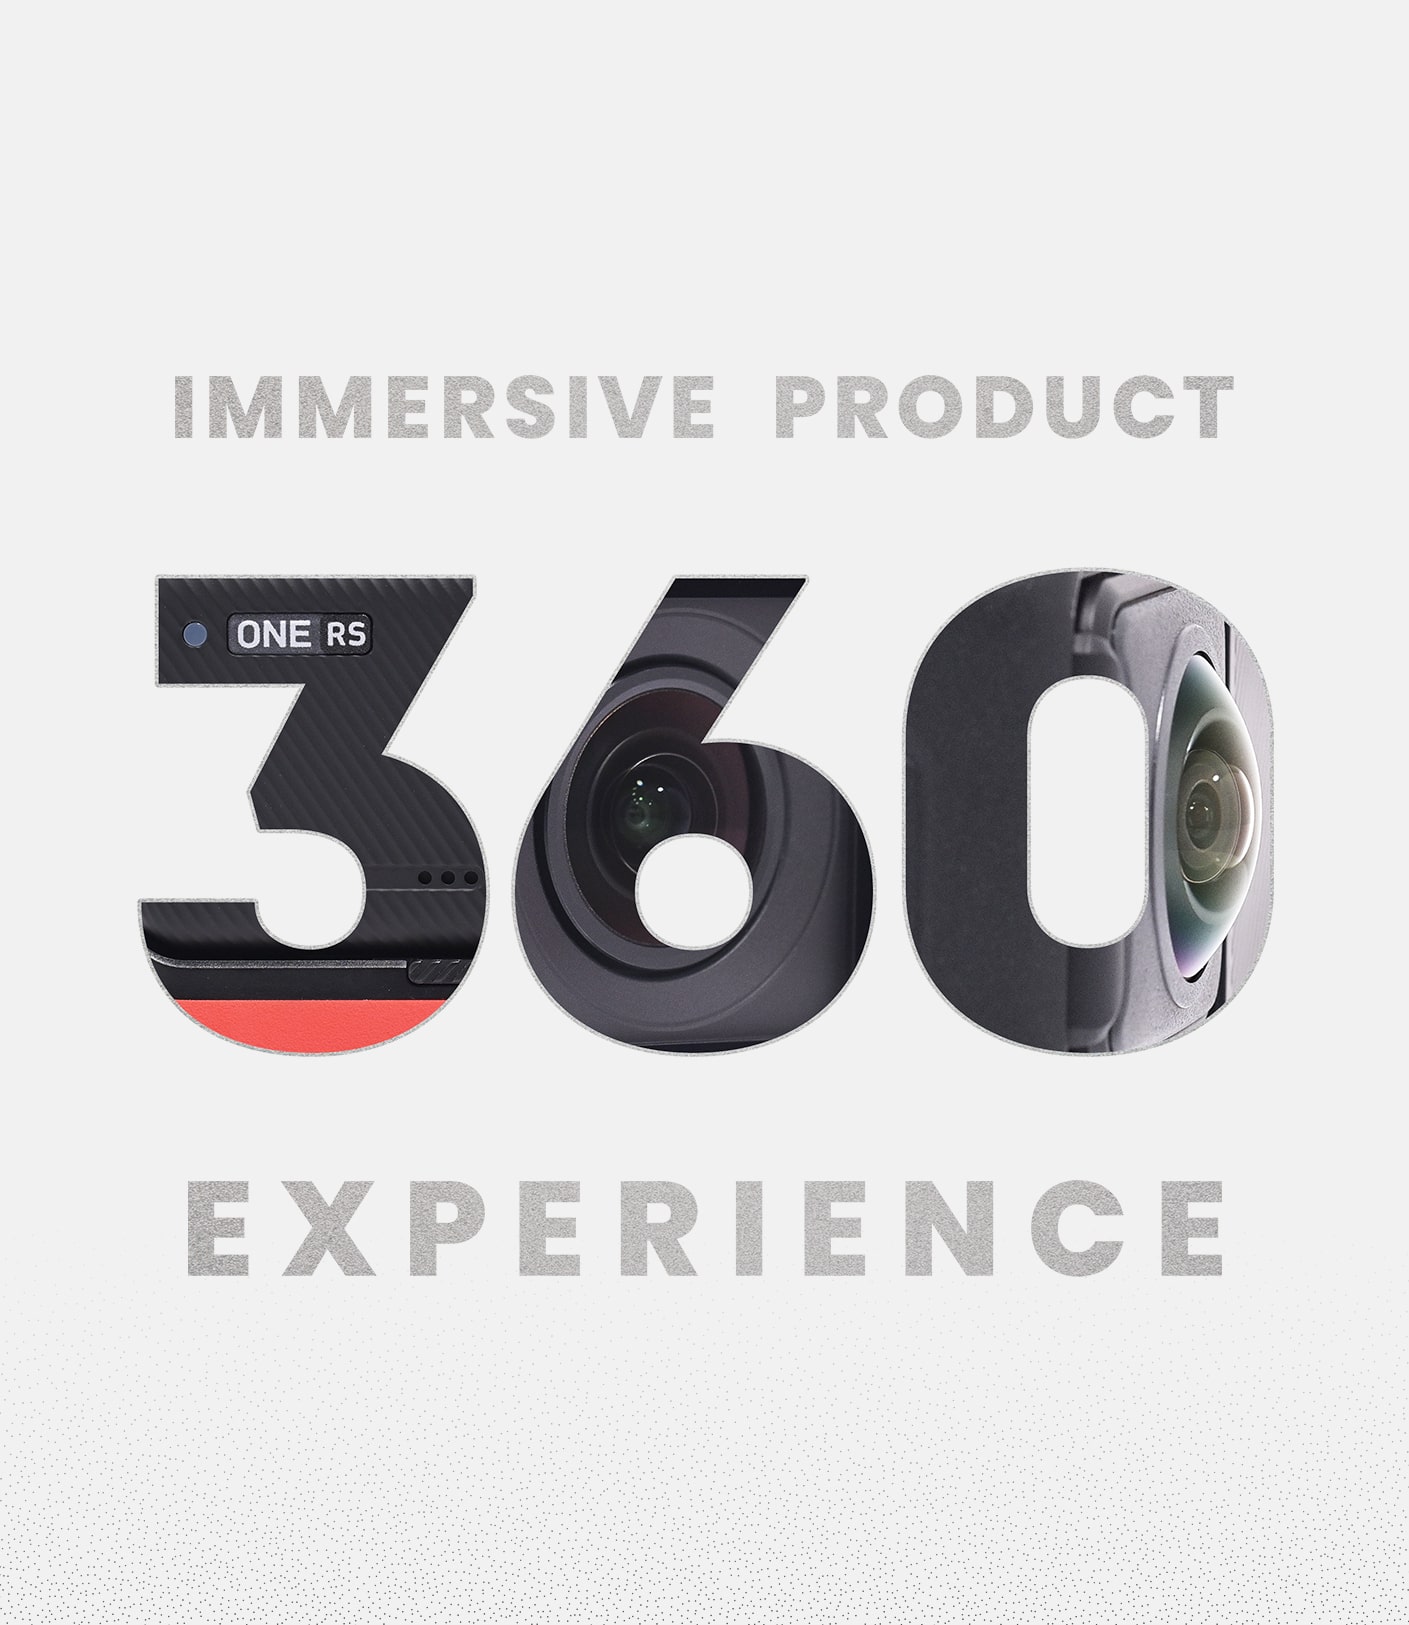 Creative design with the text Immersive Product 360 Experience, and within 360 numbers, it shows clipped snippets of the insta one RS 360 camera